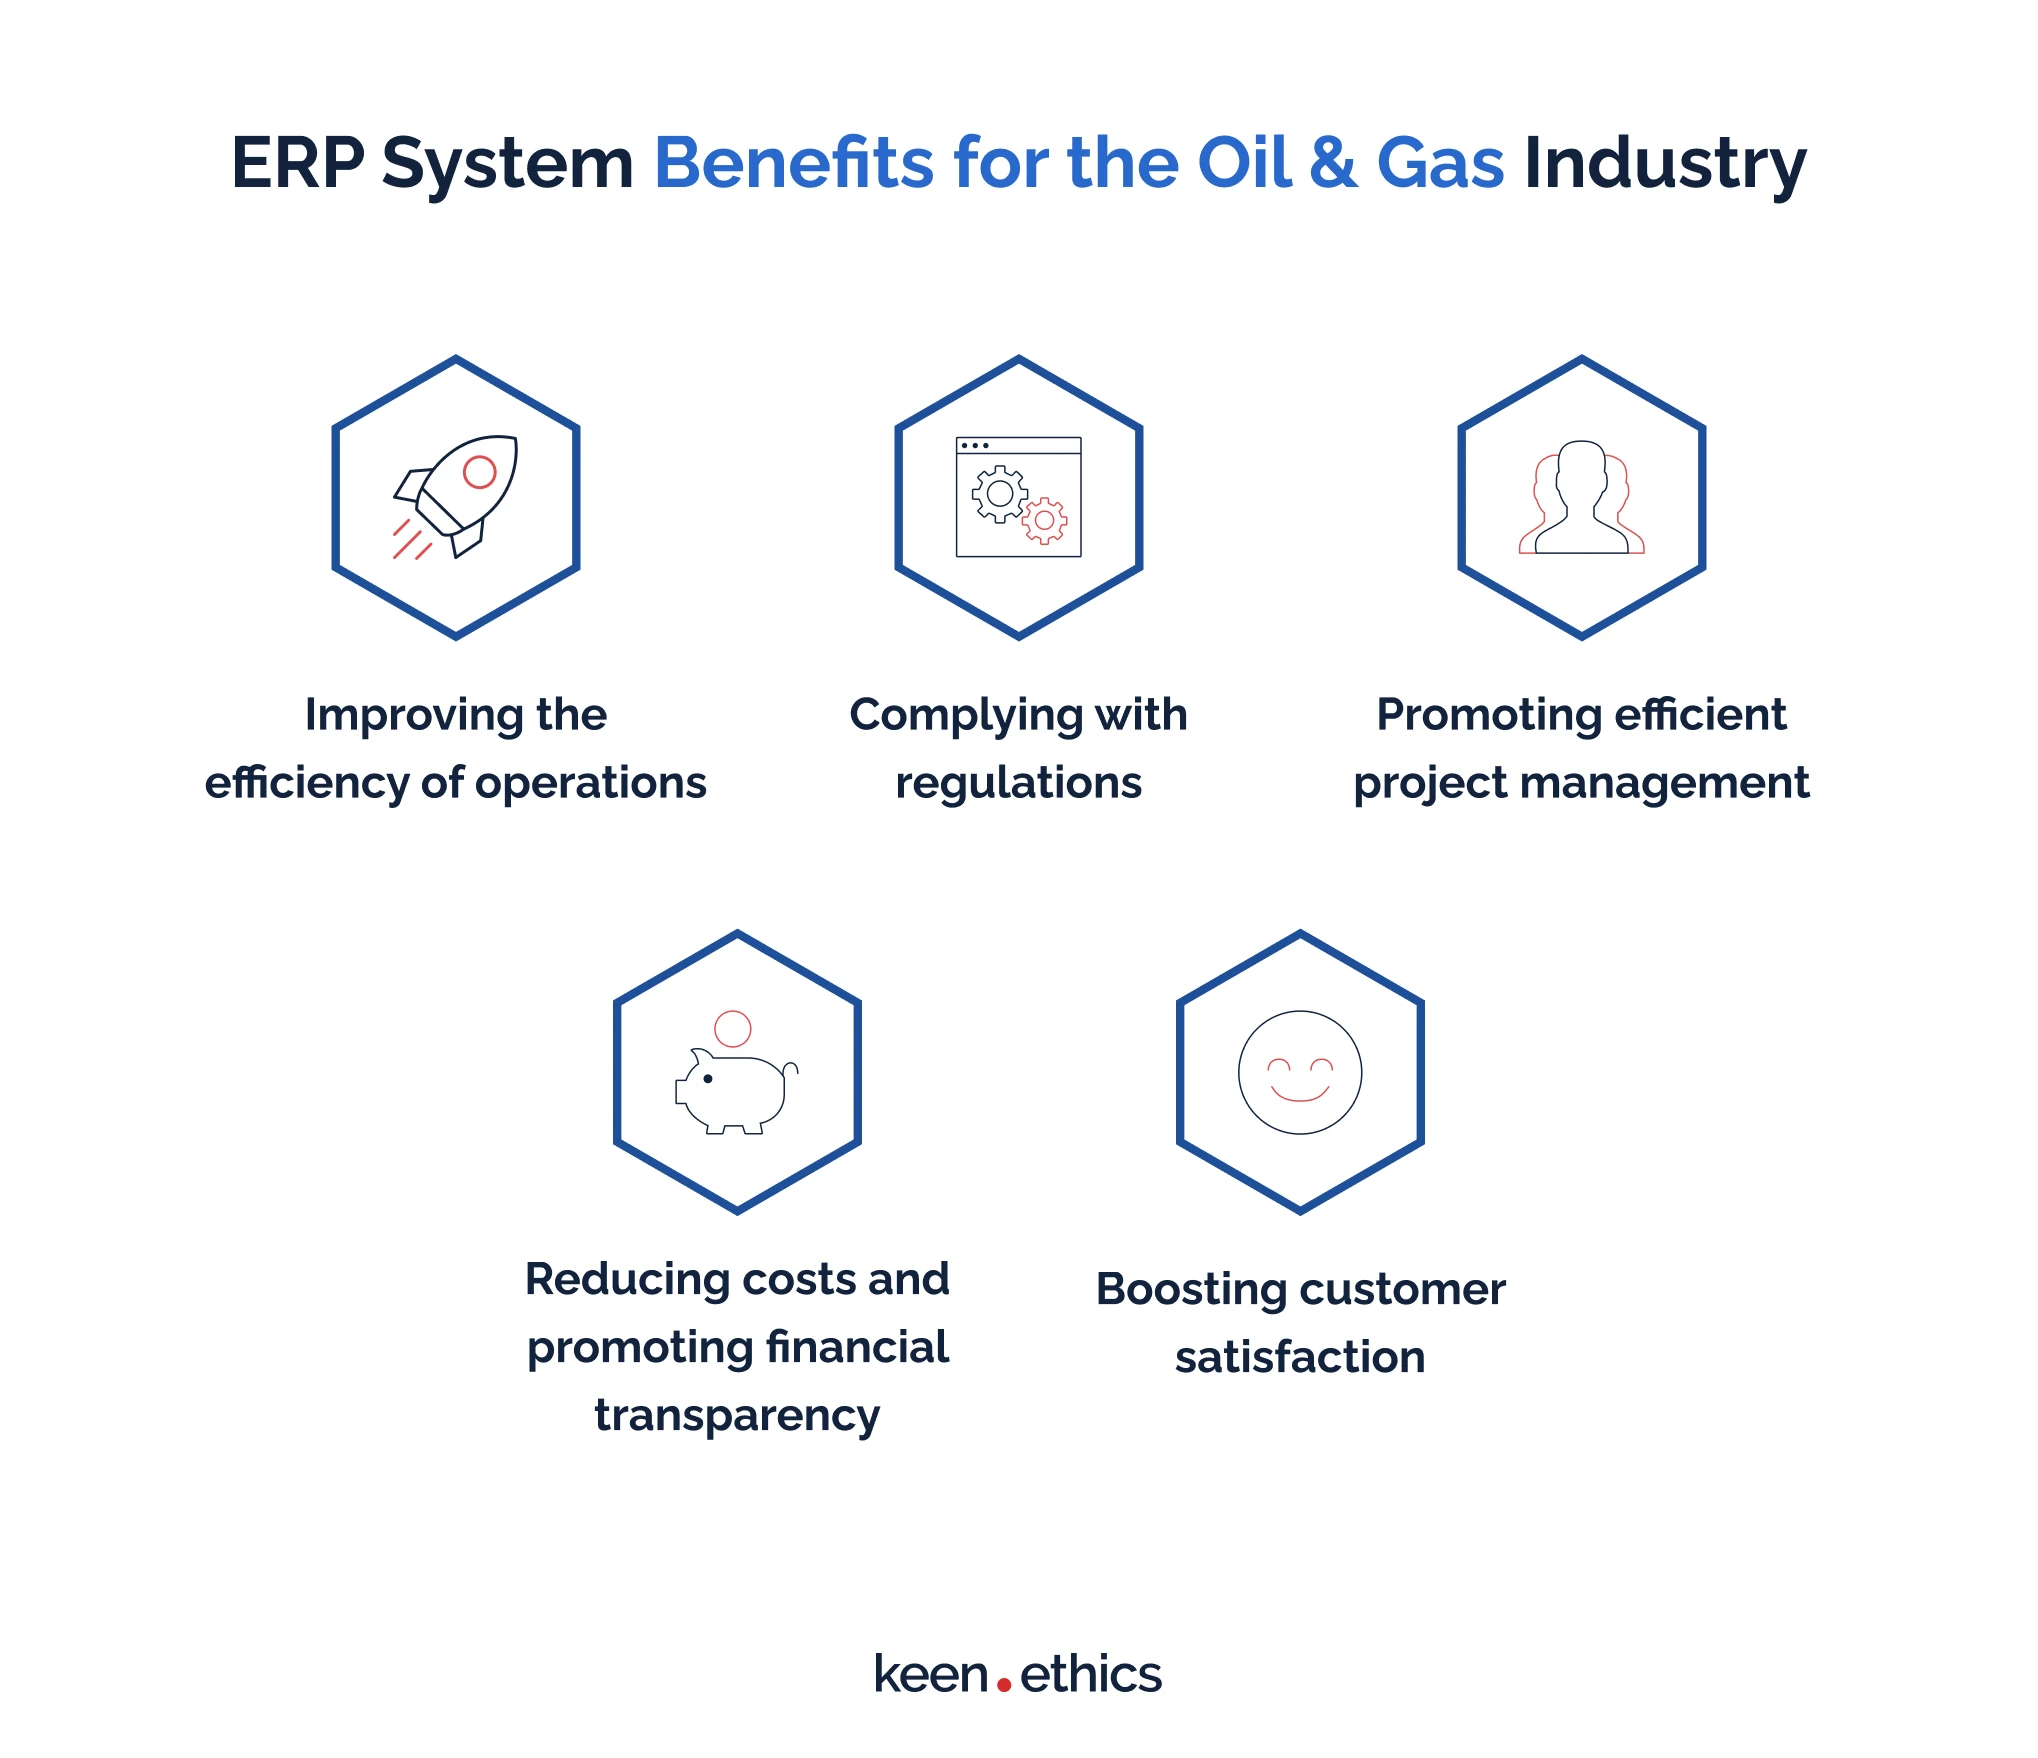 ERP system benefits for the oil and gas industry